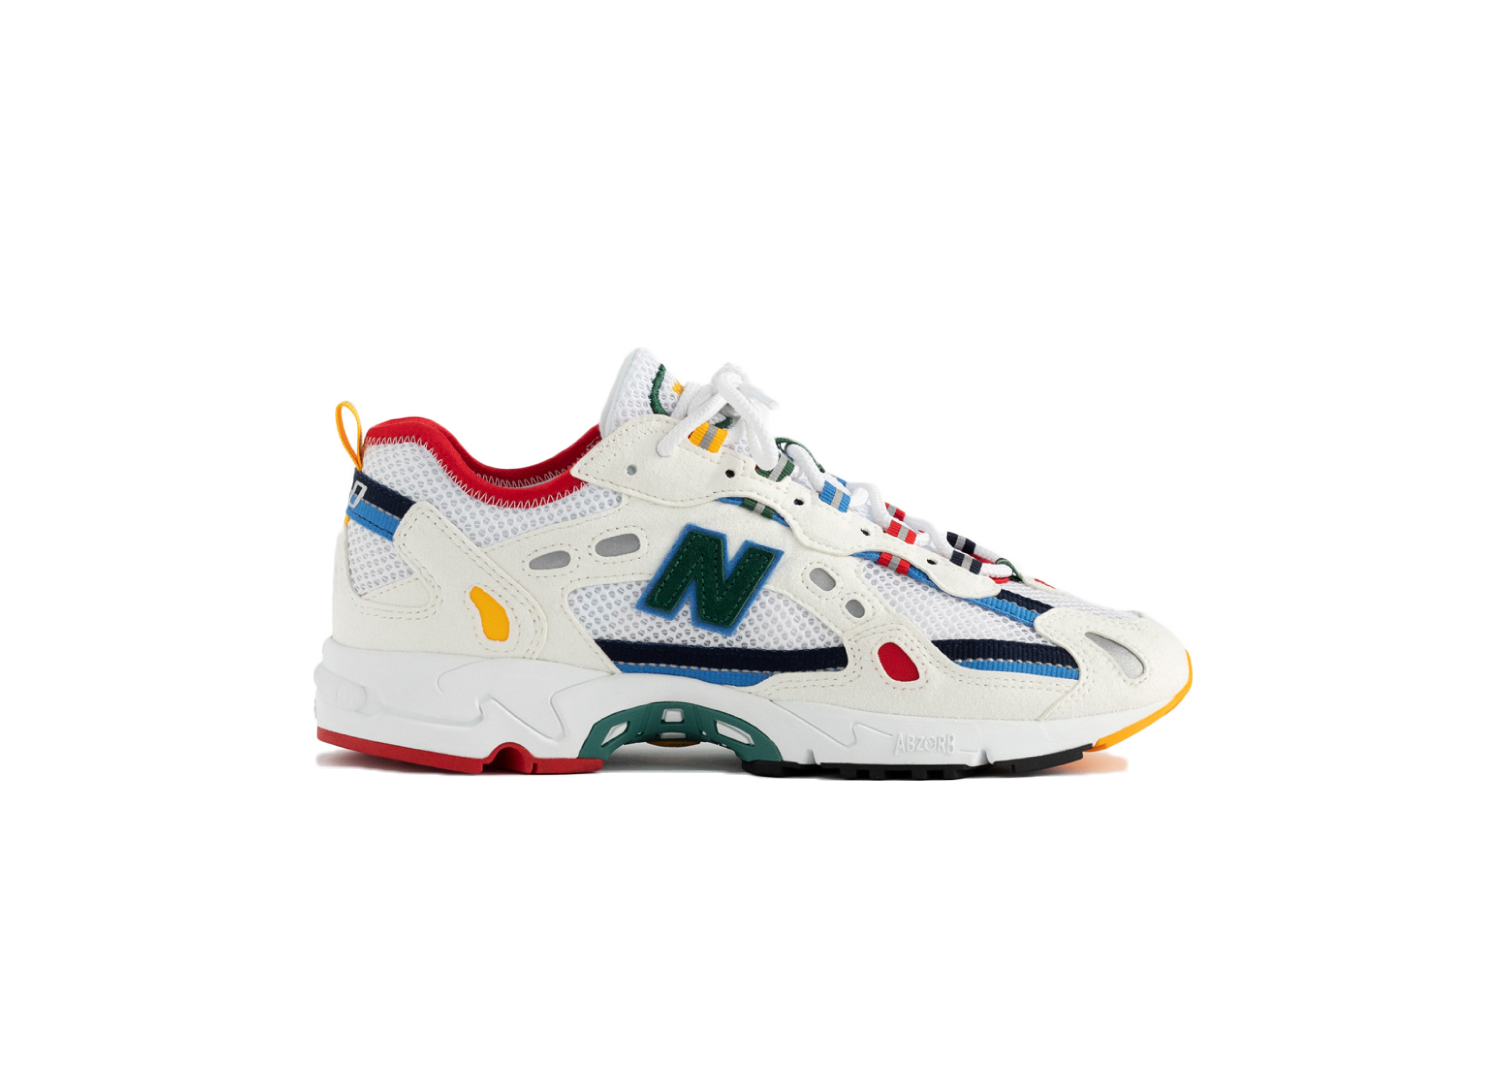 Buy New Balance Aime Leon Dore Shoes & New Sneakers - StockX